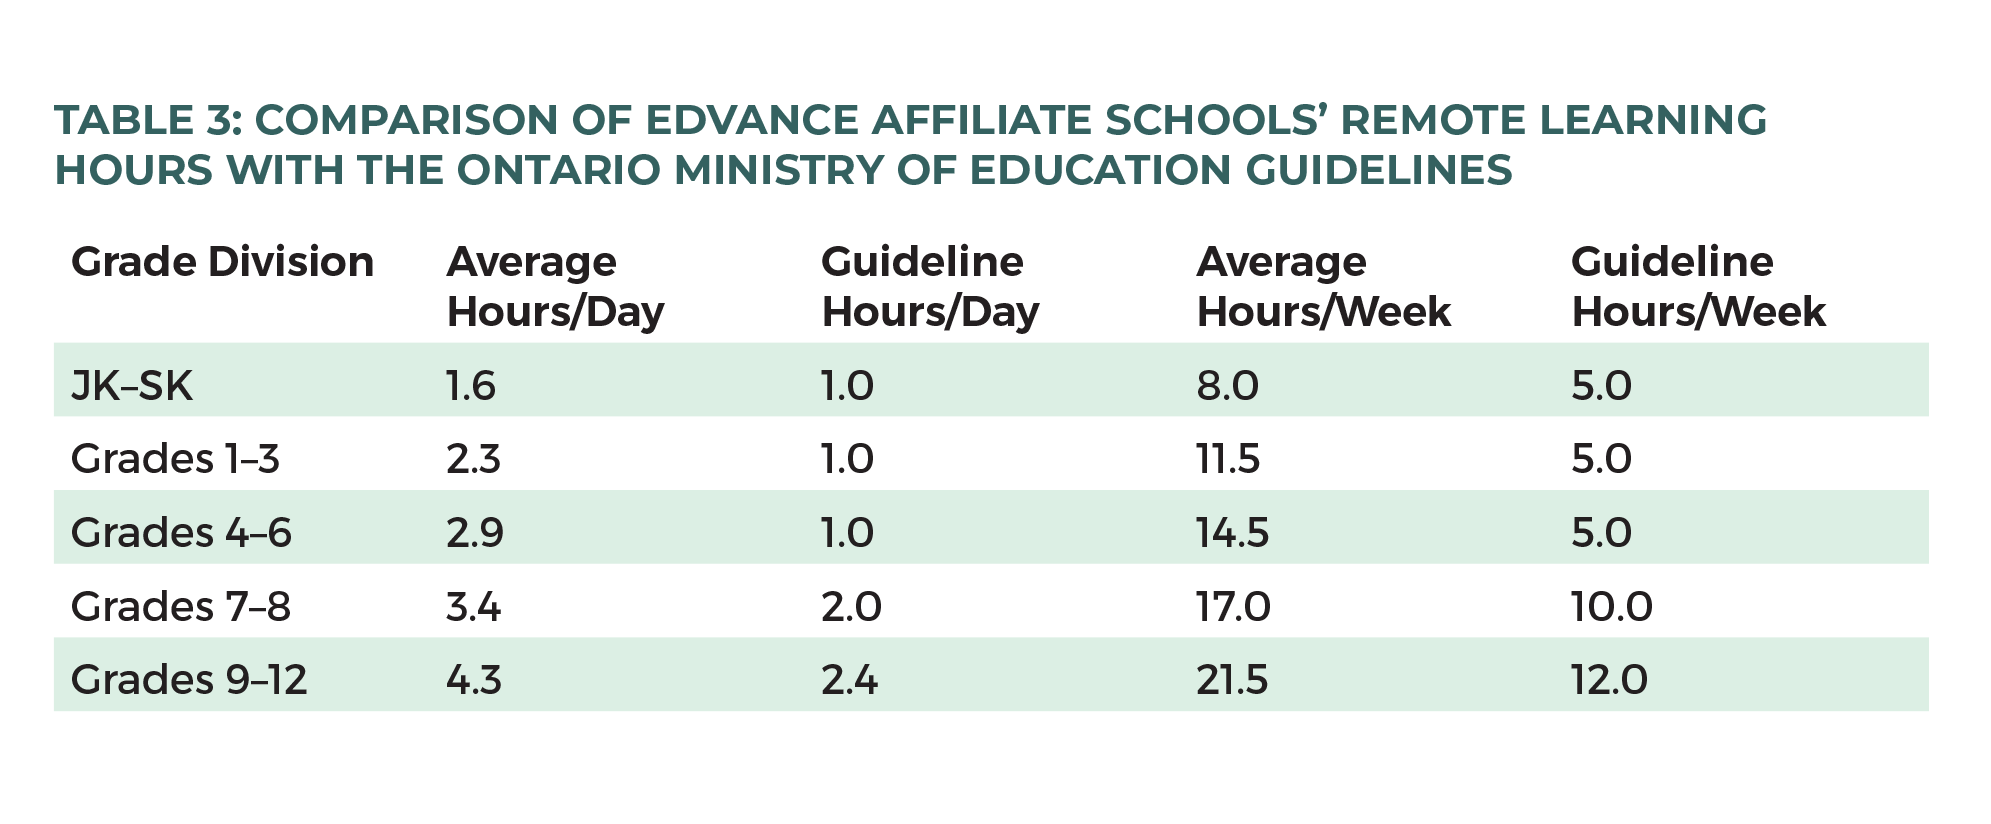 TABLE 3: COMPARISON OF EDVANCE AFFILIATE SCHOOLS’ REMOTE LEARNING HOURS WITH THE ONTARIO MINISTRY OF EDUCATION GUIDELINES